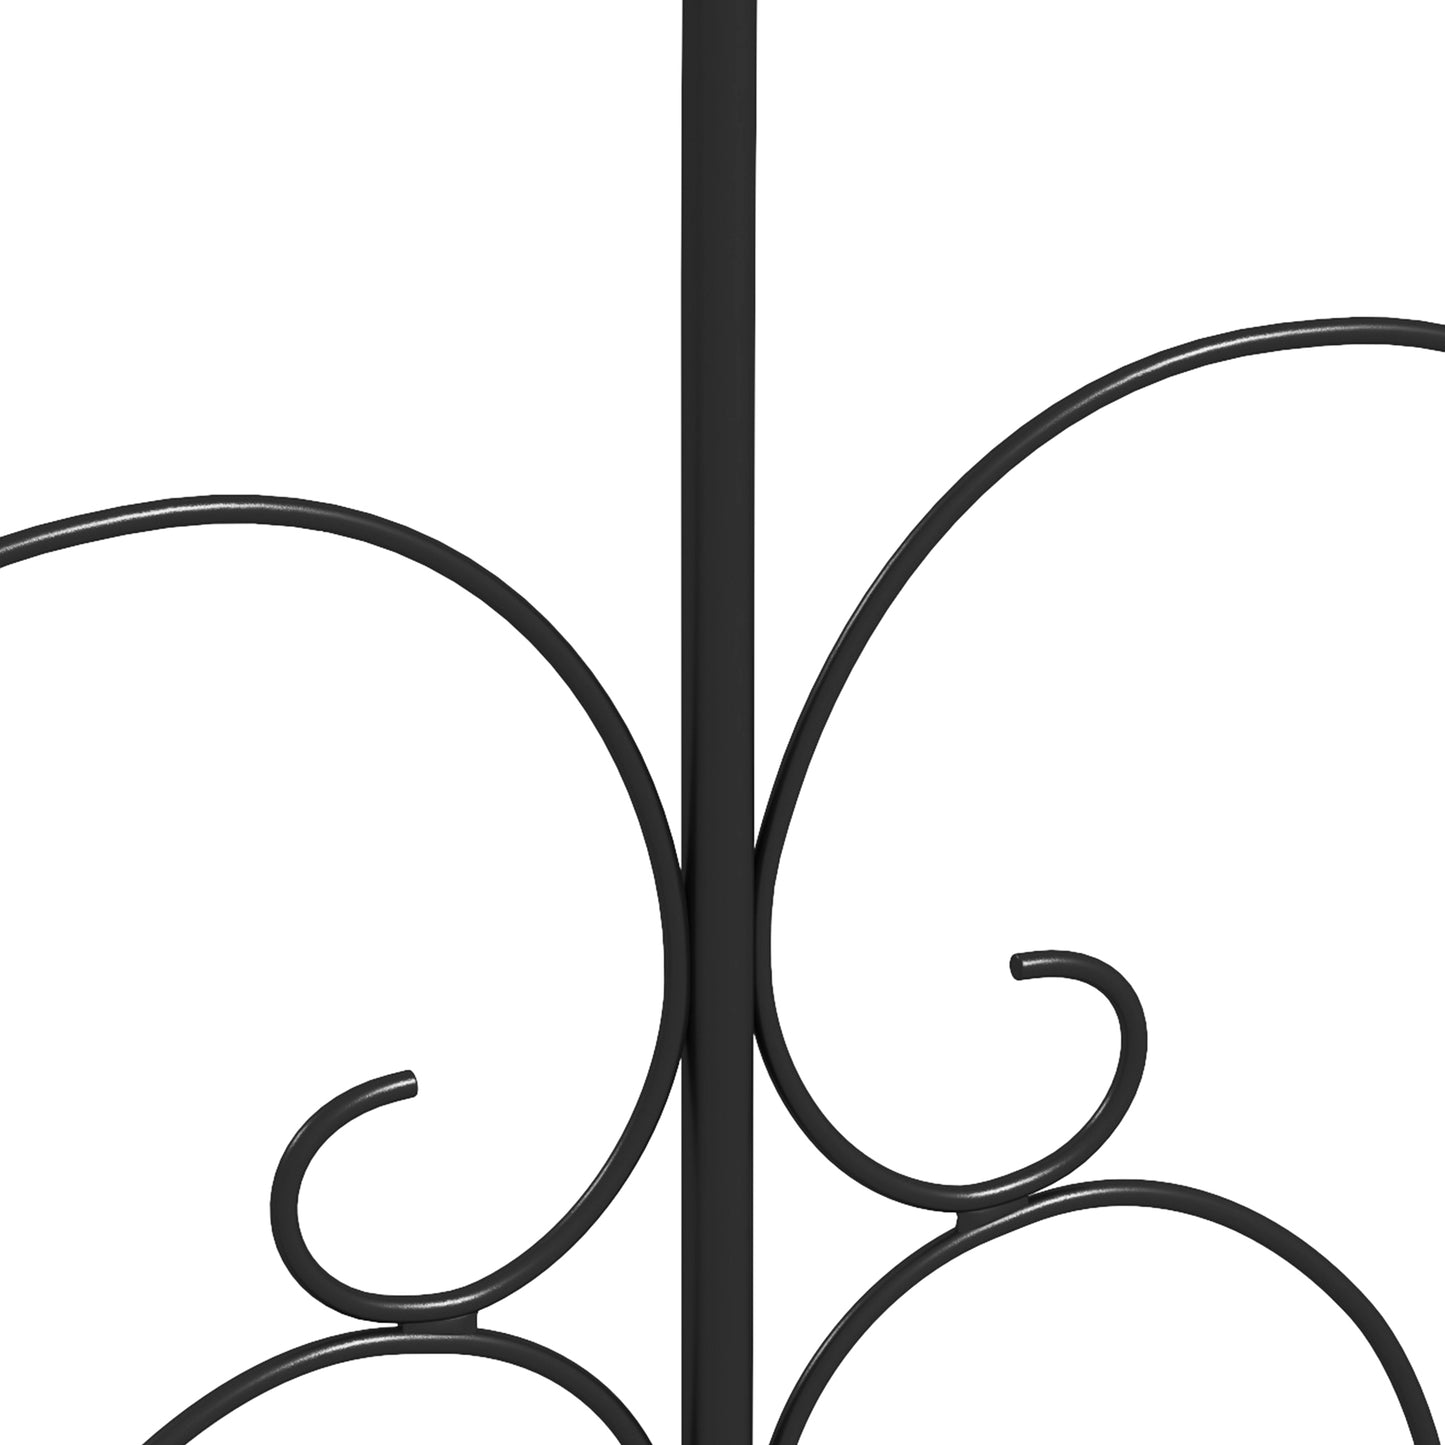 Outsunny Metal Garden Fence Panels, Decorative Outdoor Picket, Heart-shaped Scrollwork, Set of 5, Black